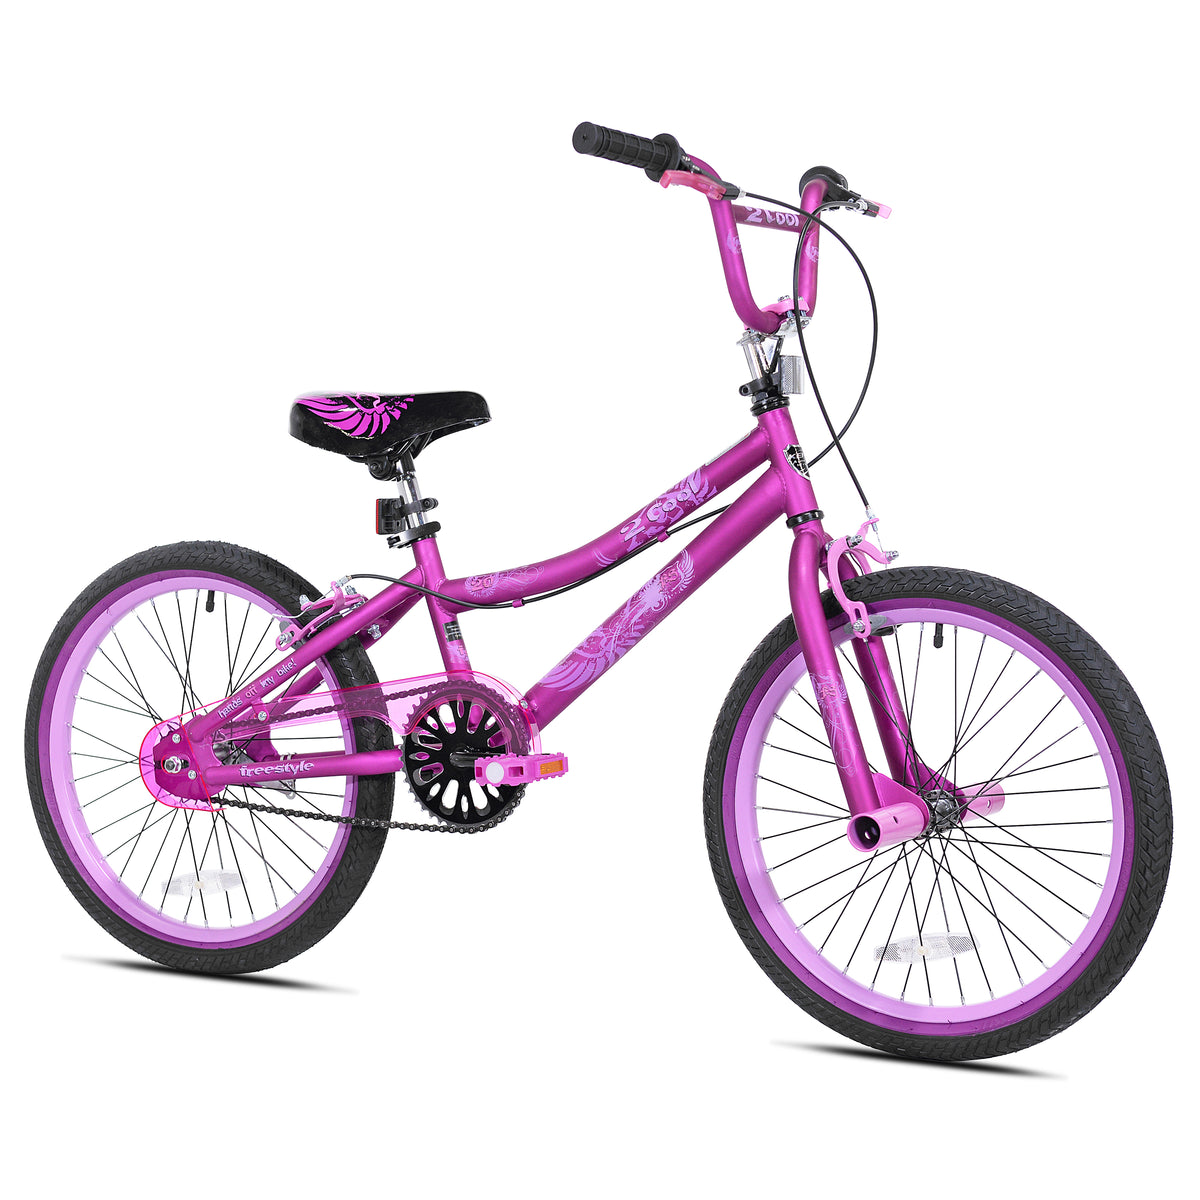 20" Kent 2 Cool | Bike for Kids Ages 7-13